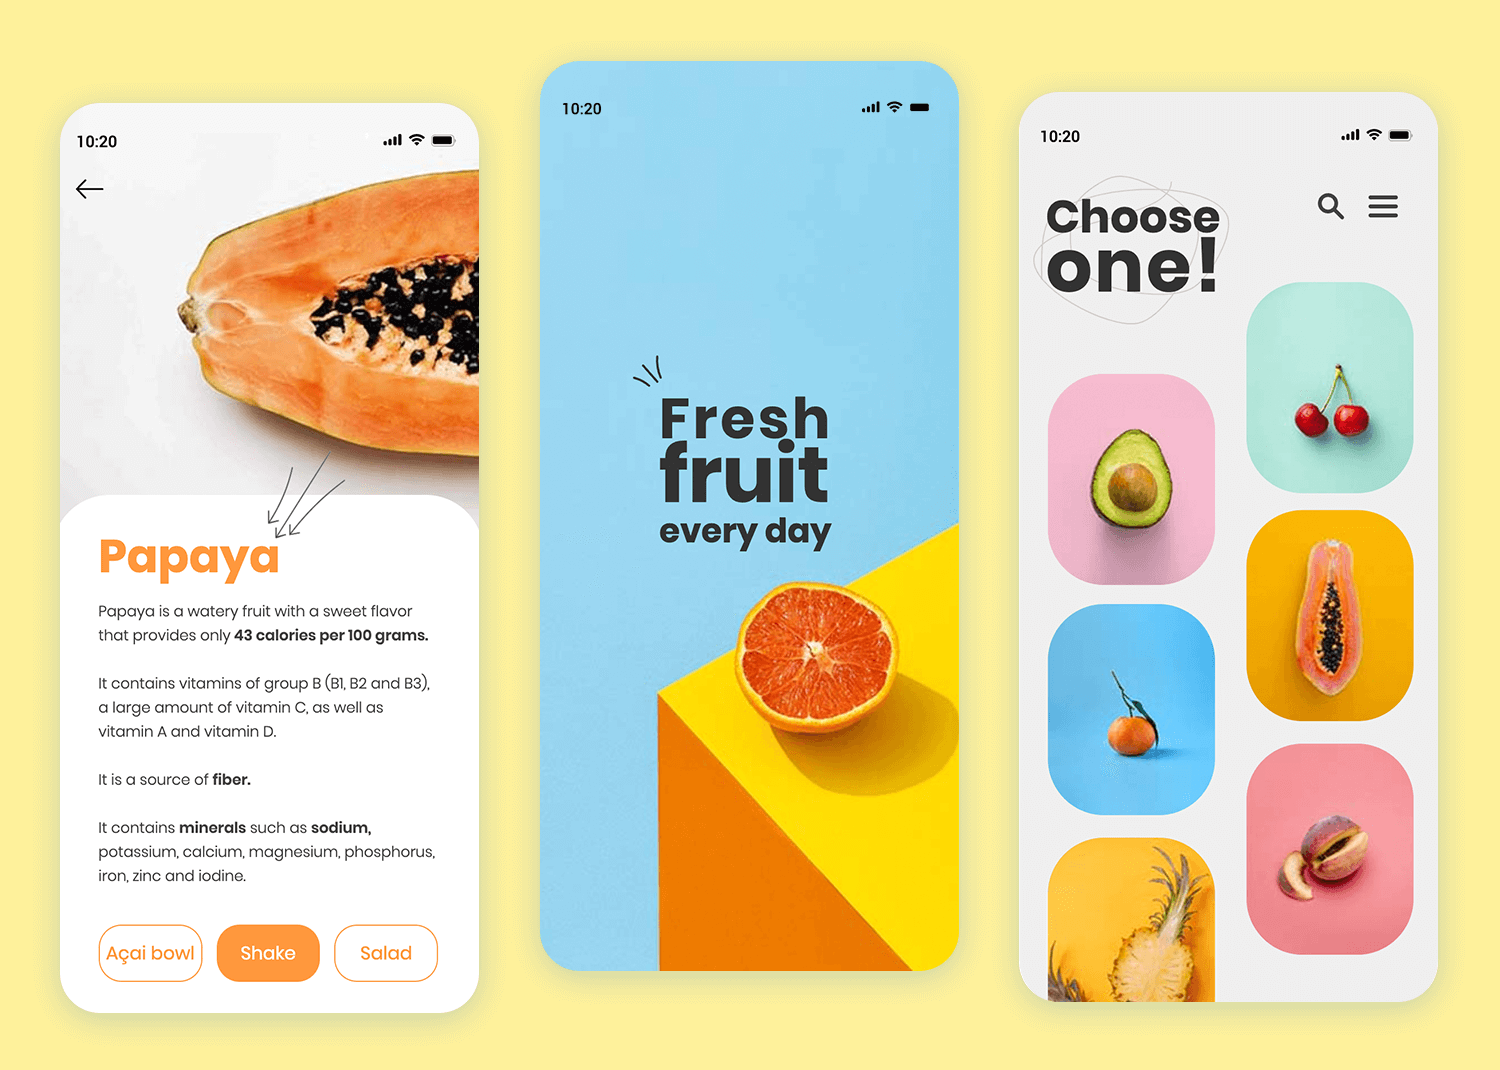 Mockup of a fruit recipe app with colorful visuals, fruit details, and recipe options.